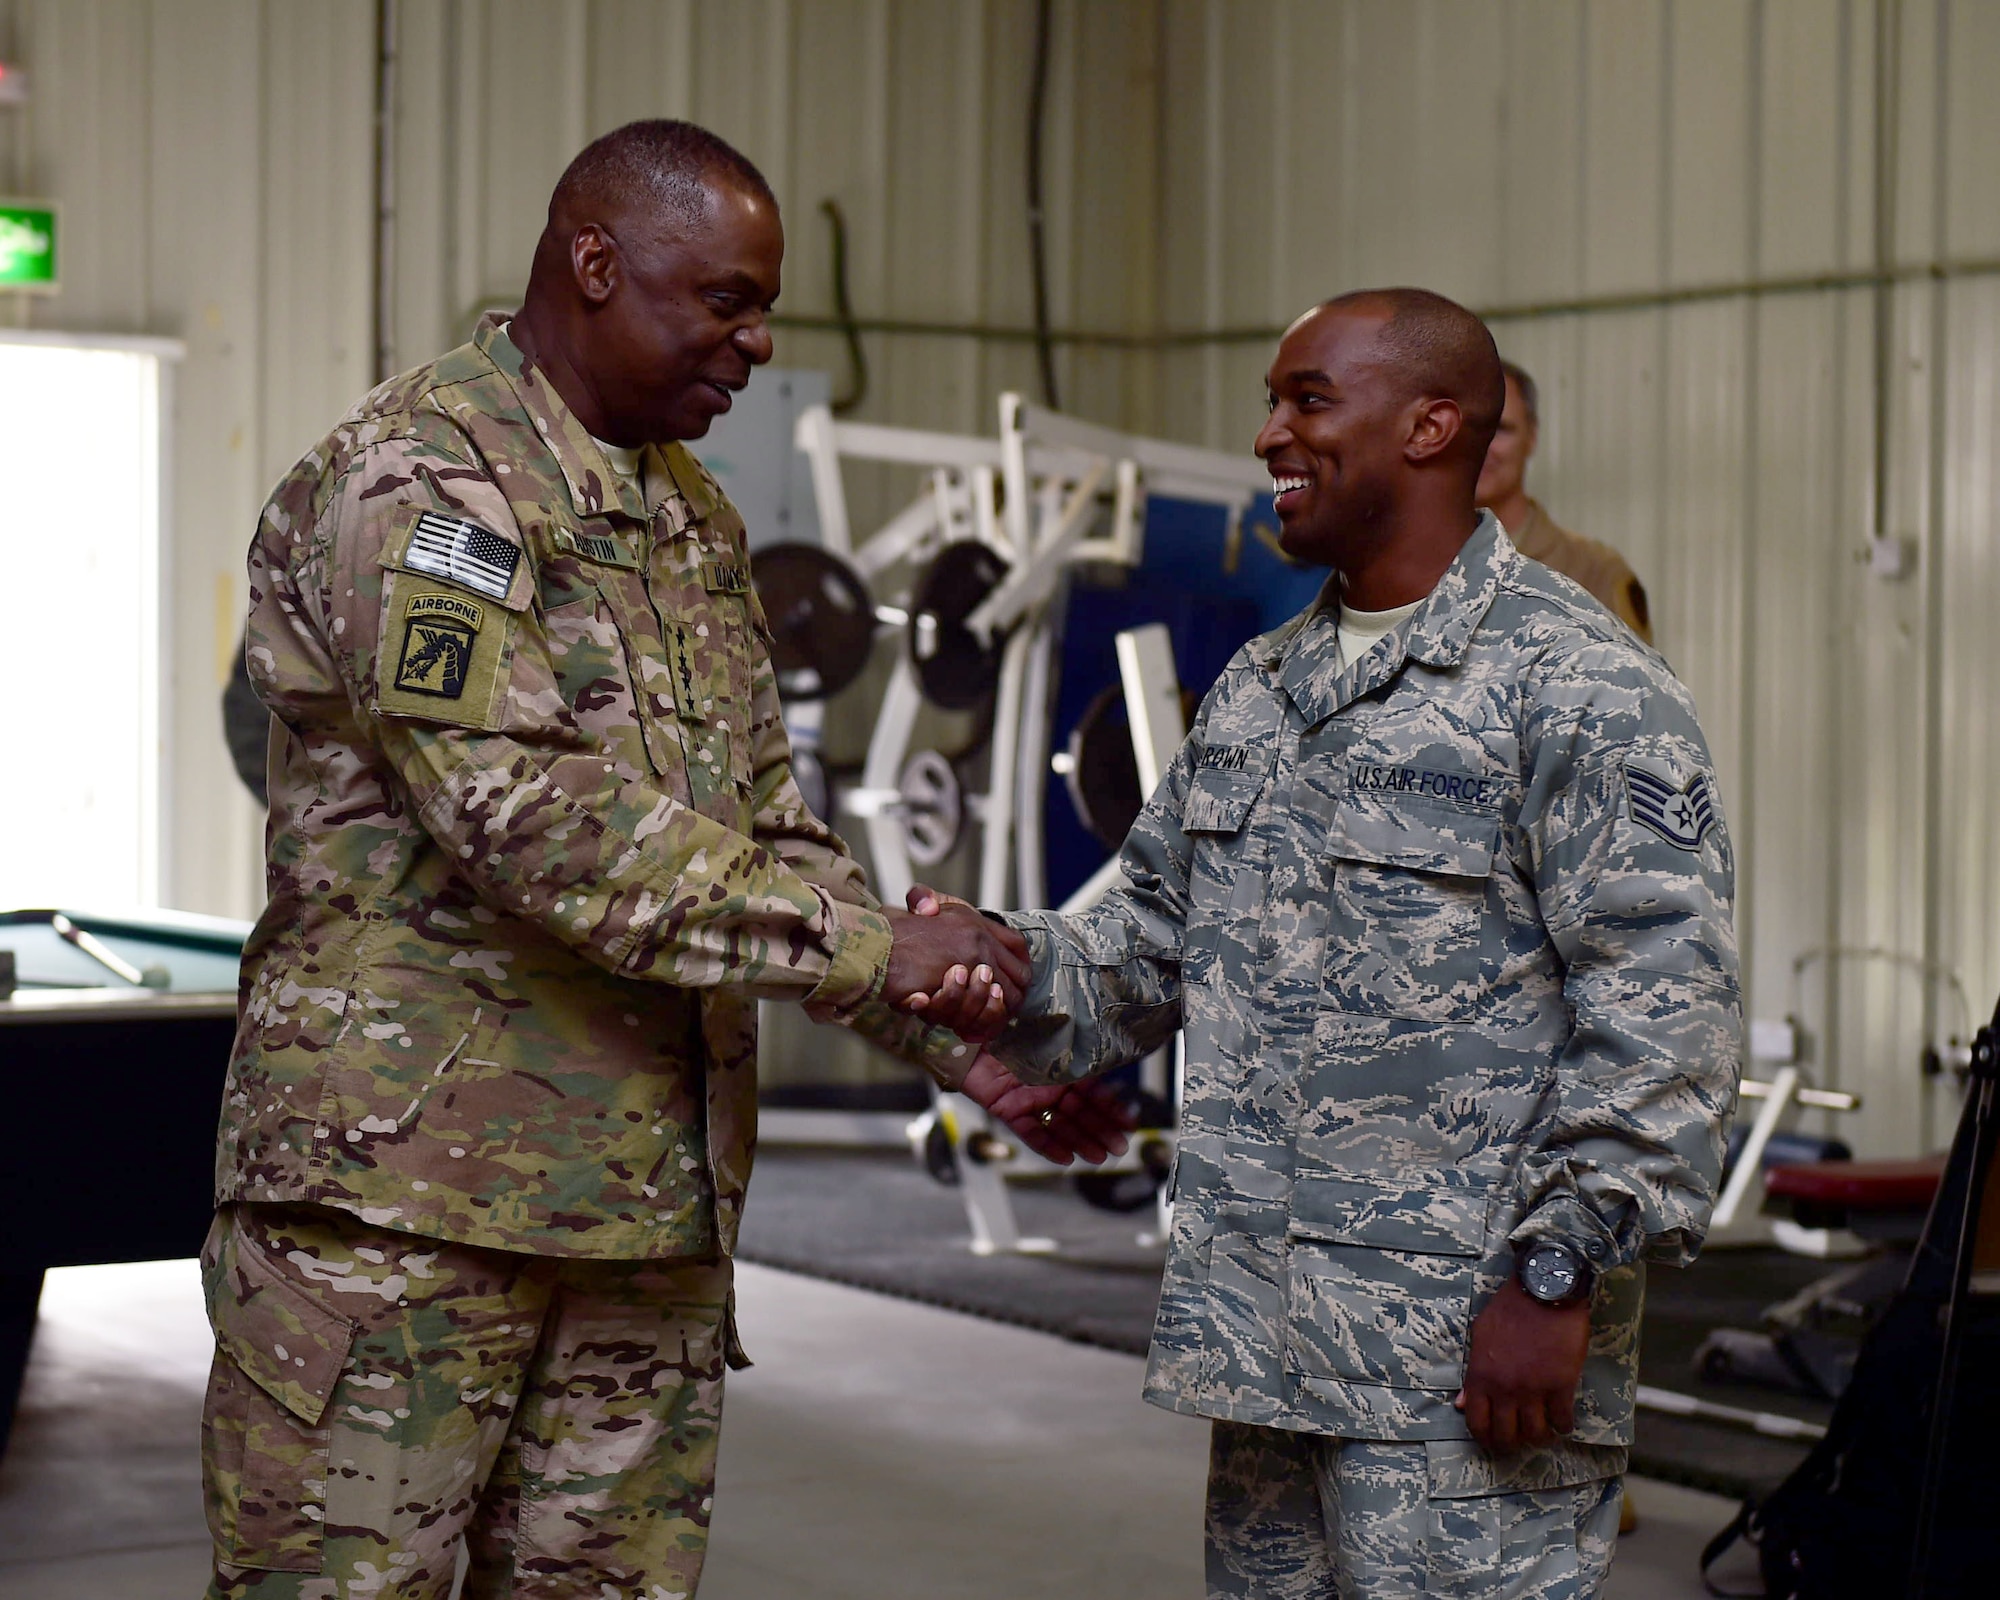 U.S. Army Gen. Lloyd J. Austin III, commander, U.S. Central Command, coins Staff Sgt. Zachary Brown, a 386th Expeditionary Communications Squadron Client Systems Technician, during a visit to the 386th AEW Nov. 24, 2015, at an undisclosed location in Southwest Asia. During his visit Austin presented a coin to four Airmen in recognition for their outstanding performance within their units. (U.S. Air Force photo by Staff Sgt. Jerilyn Quintanilla) 